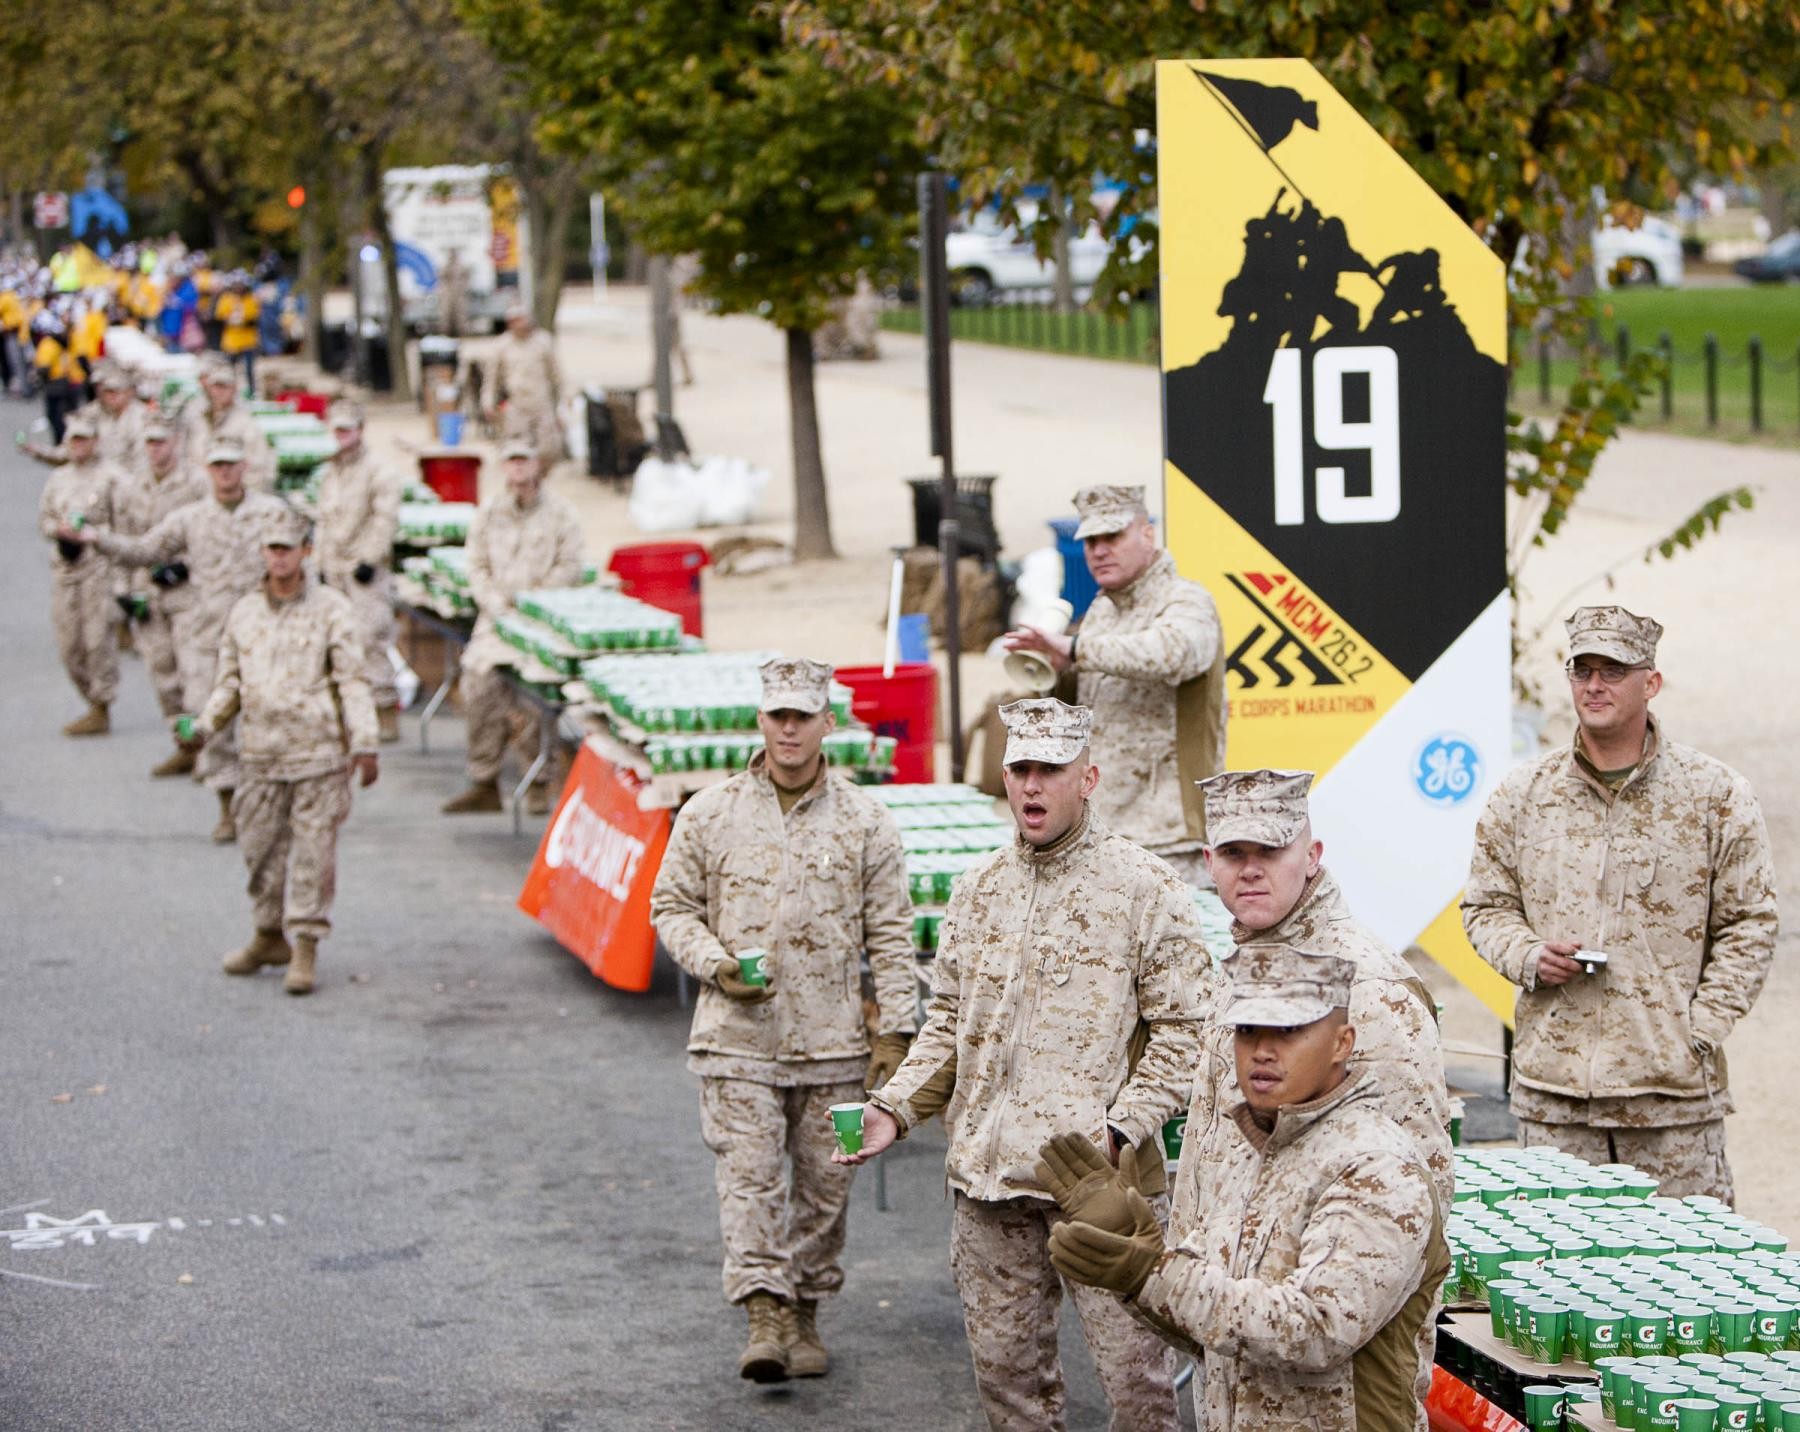 Marine Corps Marathon will be held in person this year: Here's